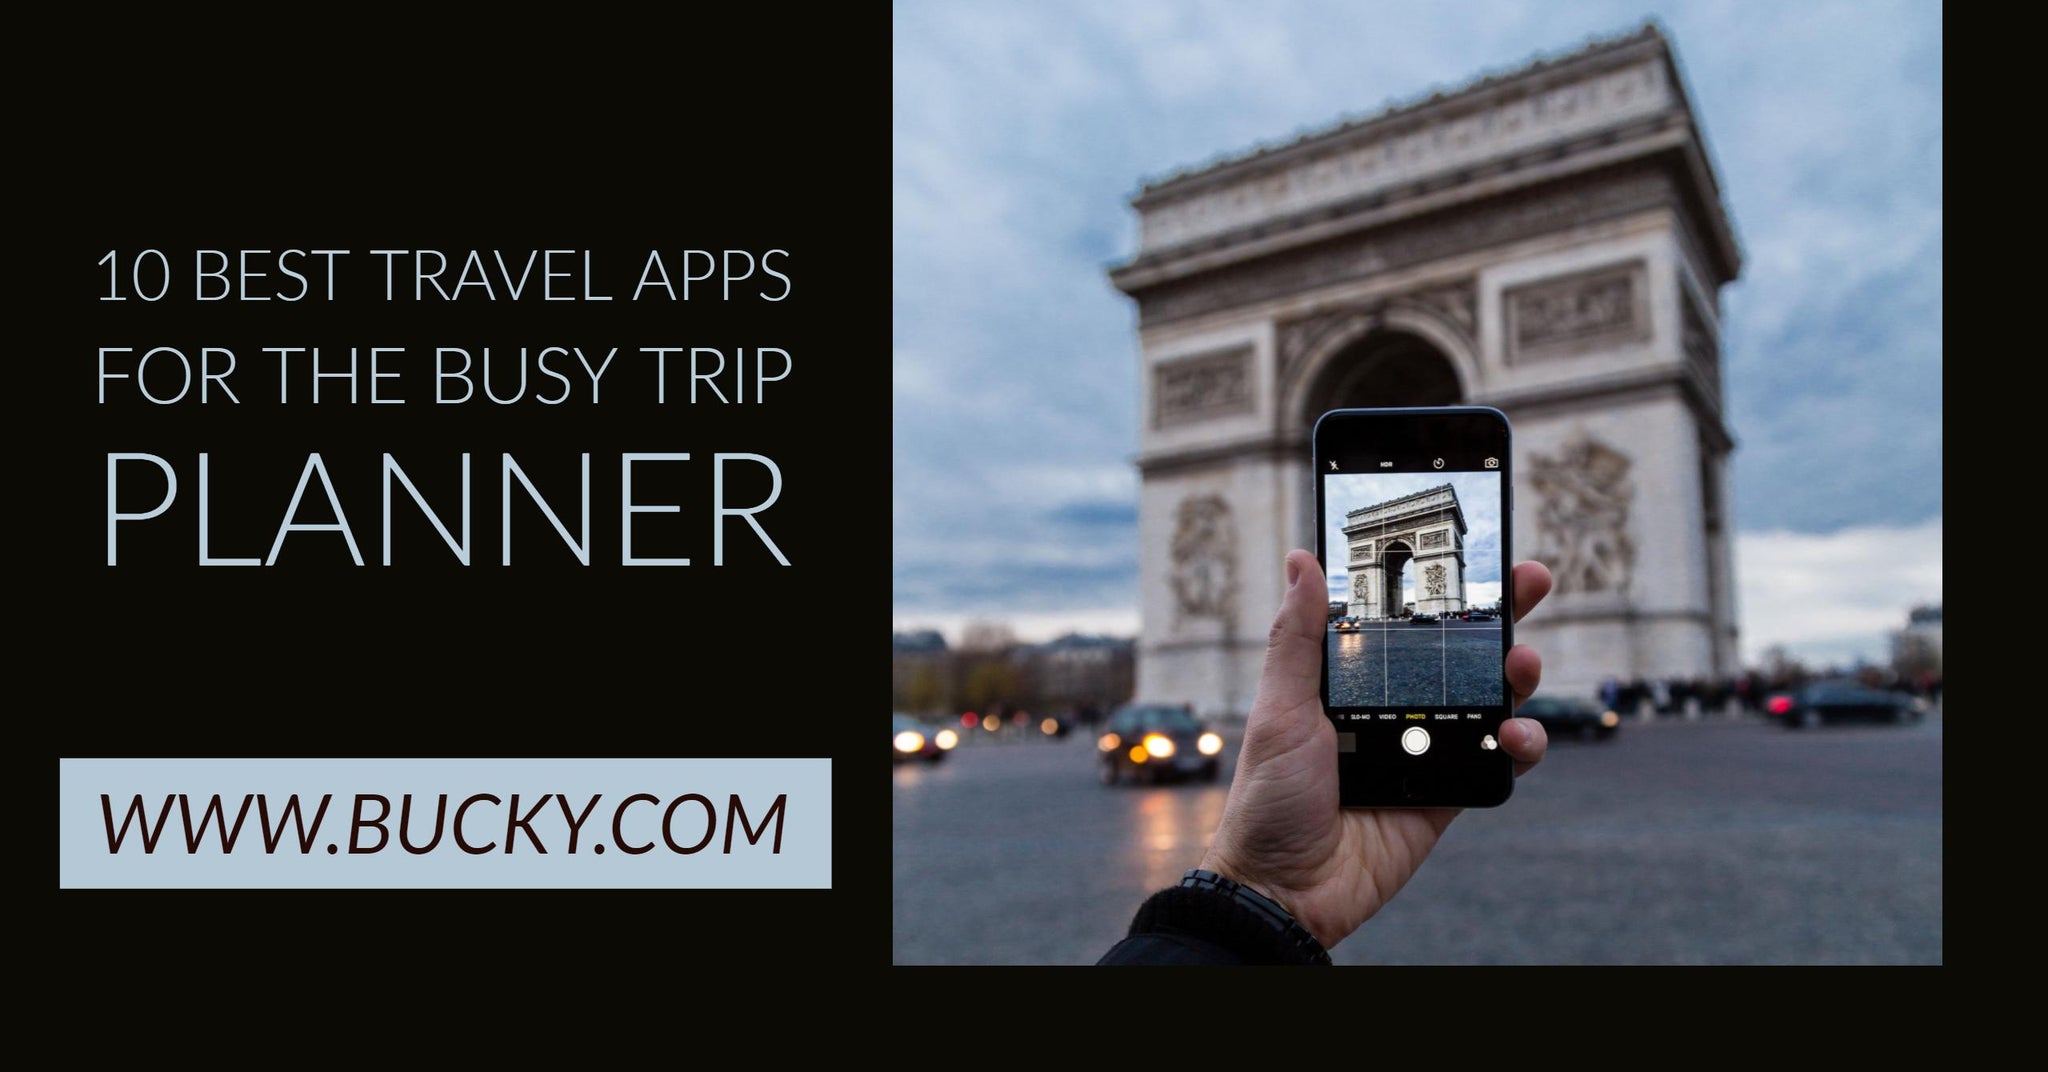 10 Best Travel Apps for the Busy Trip Planner